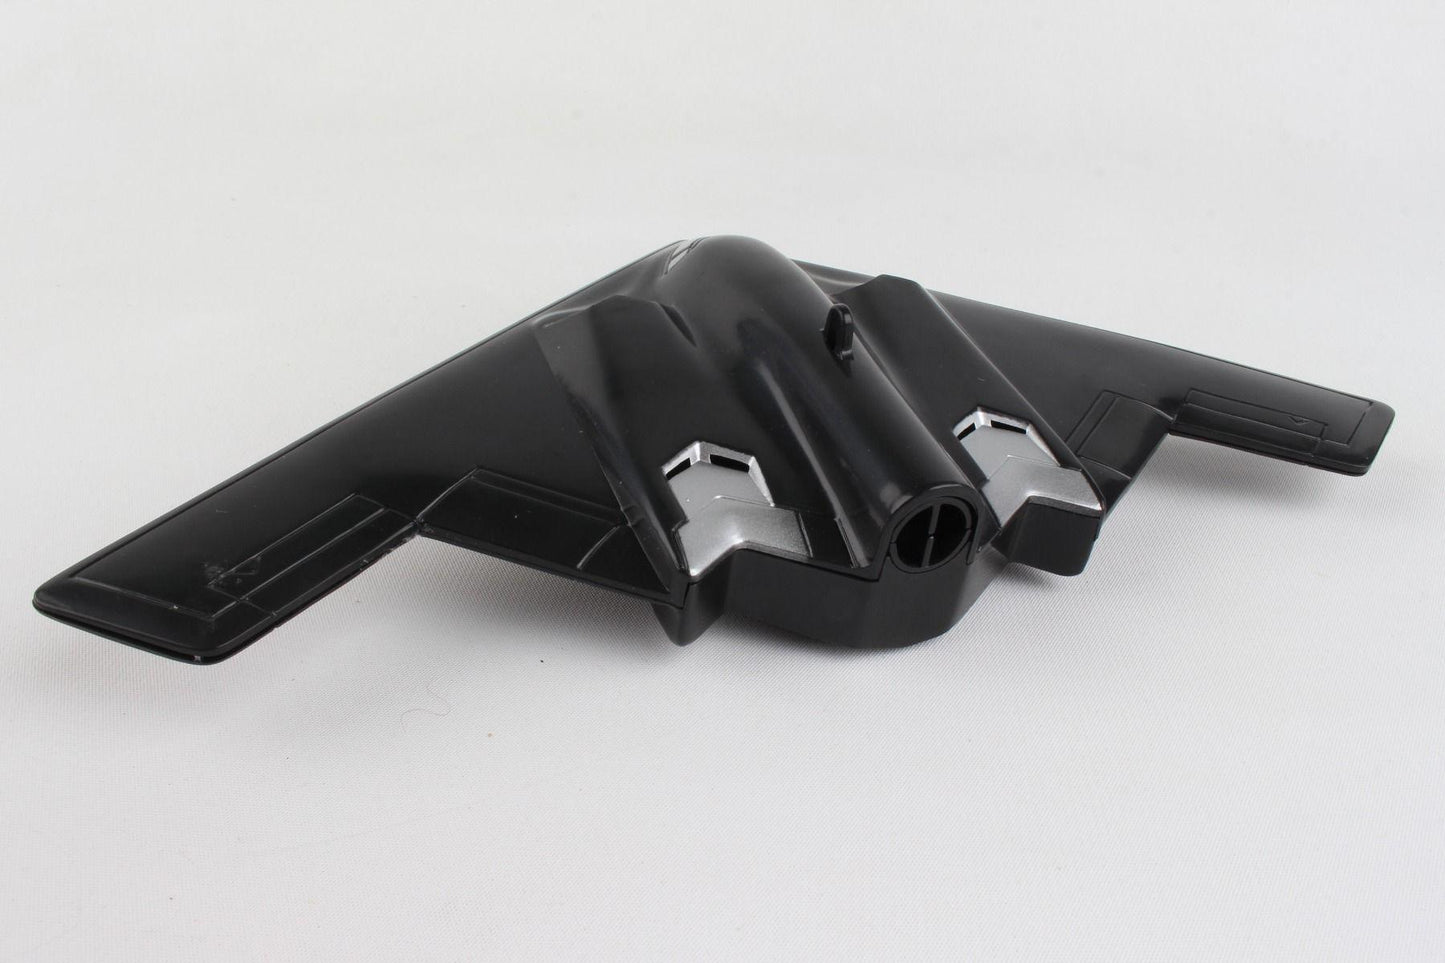 B-2 Bomber Diecast Flying Plane Toy on a String, Navigate itself on a 360 degrees flight path, 5 inches long